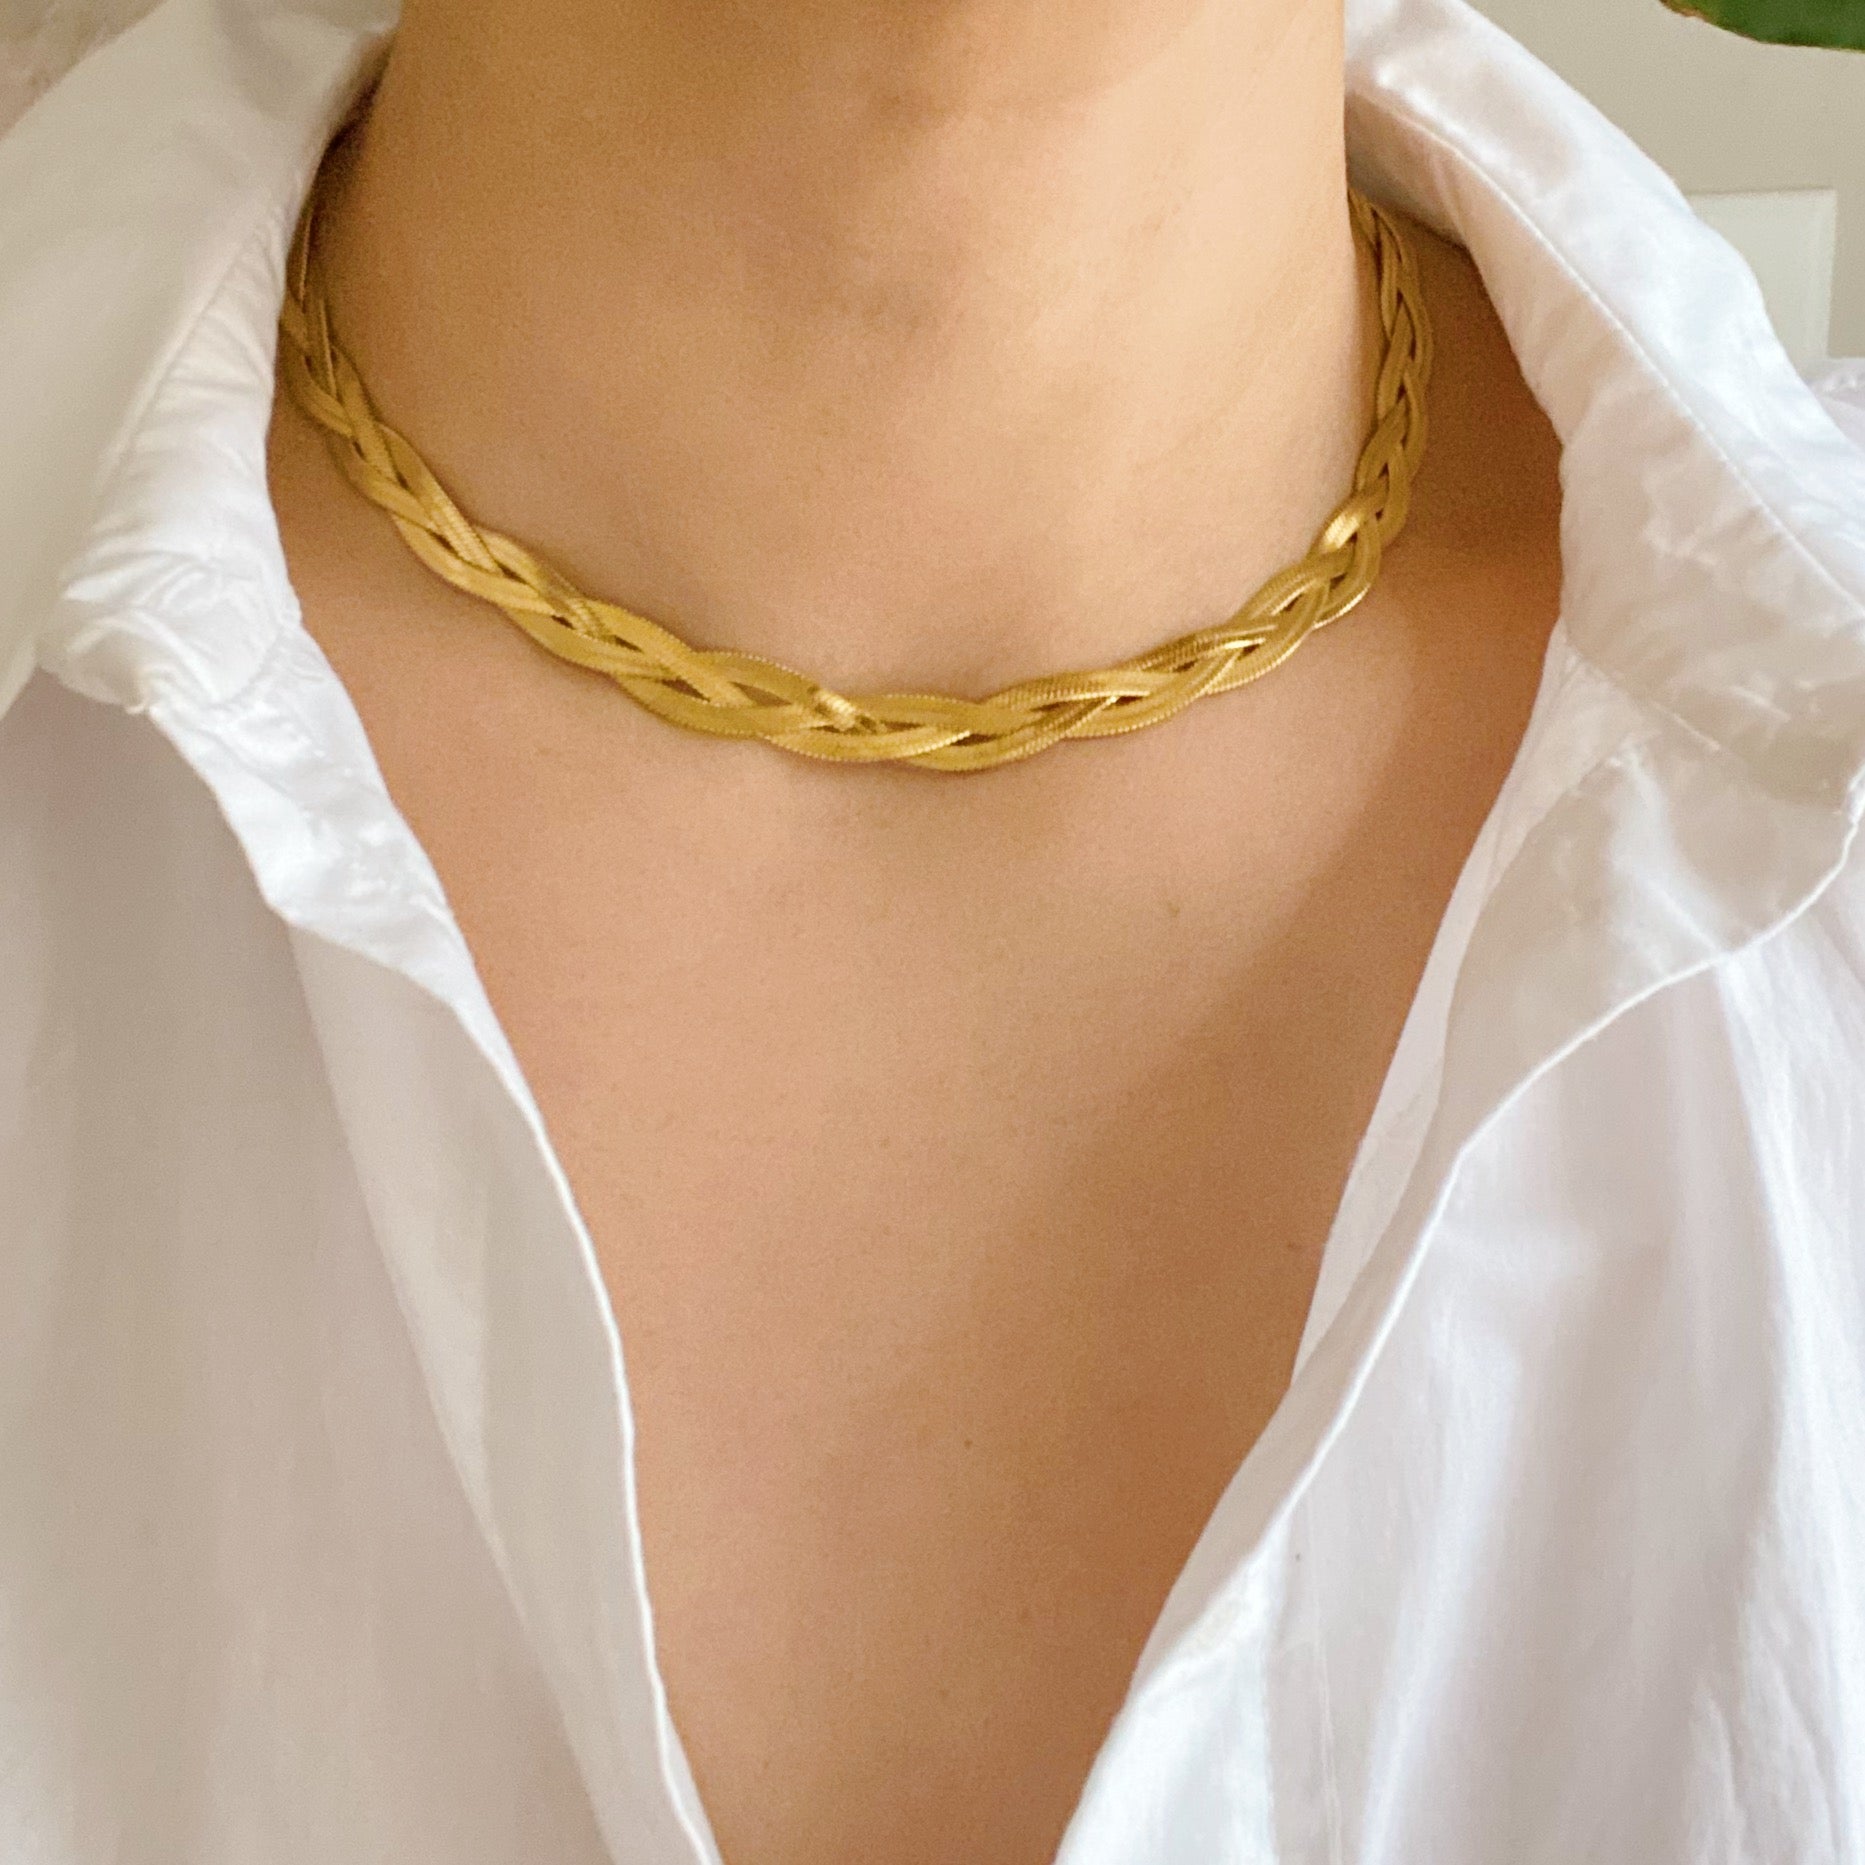 Sold at Auction: 18K TRI TONE GOLD BRAIDED HERRINGBONE NECKLACE